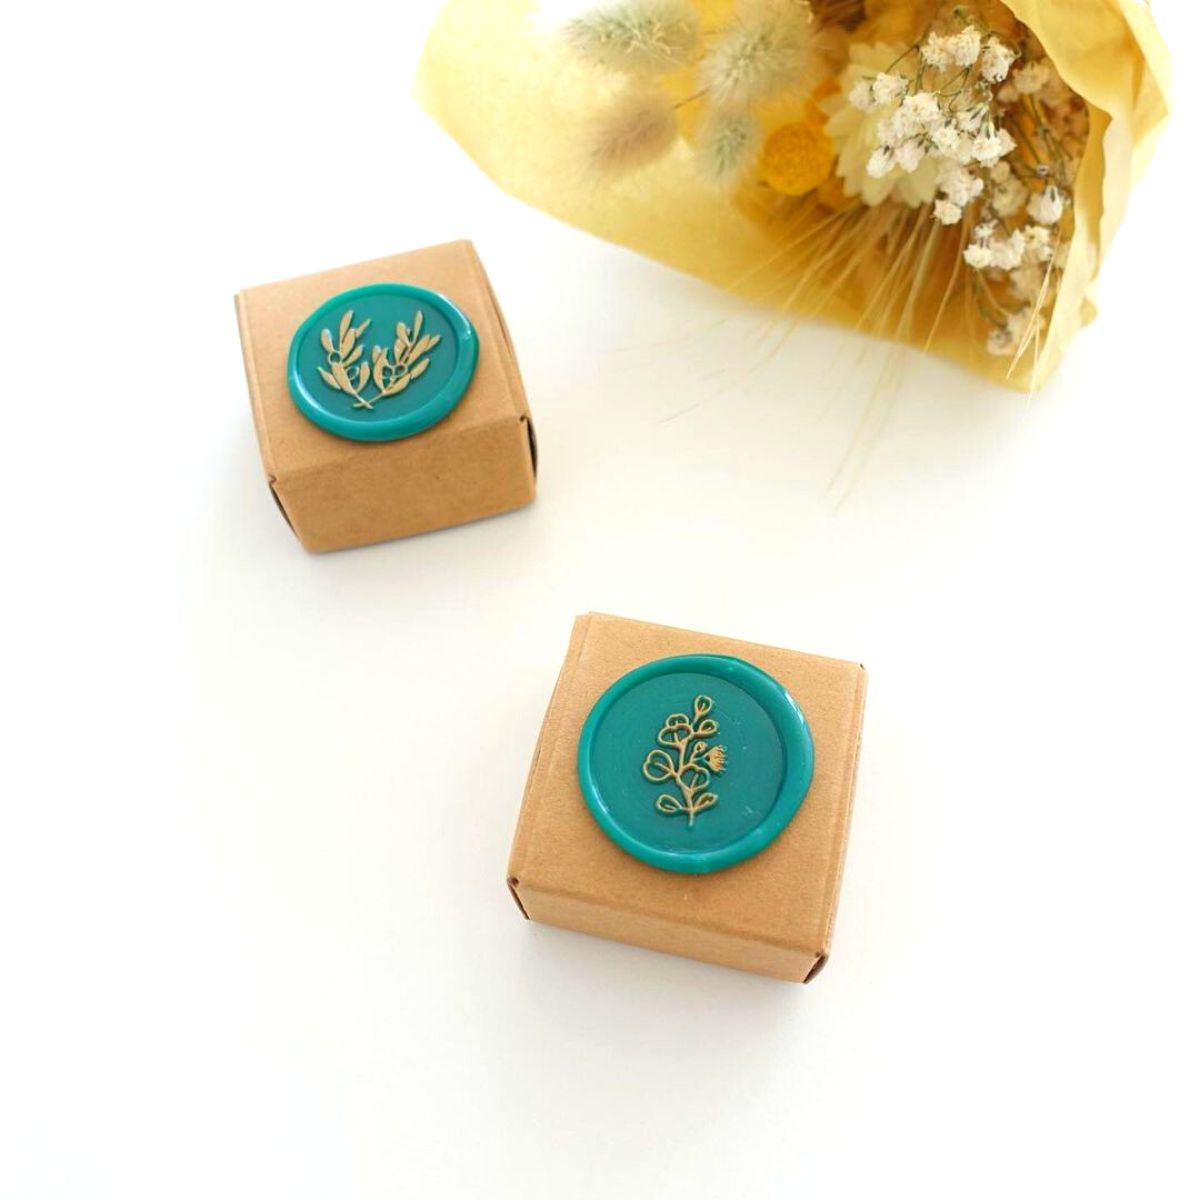 Floral wax seal designs for invitations and gifts